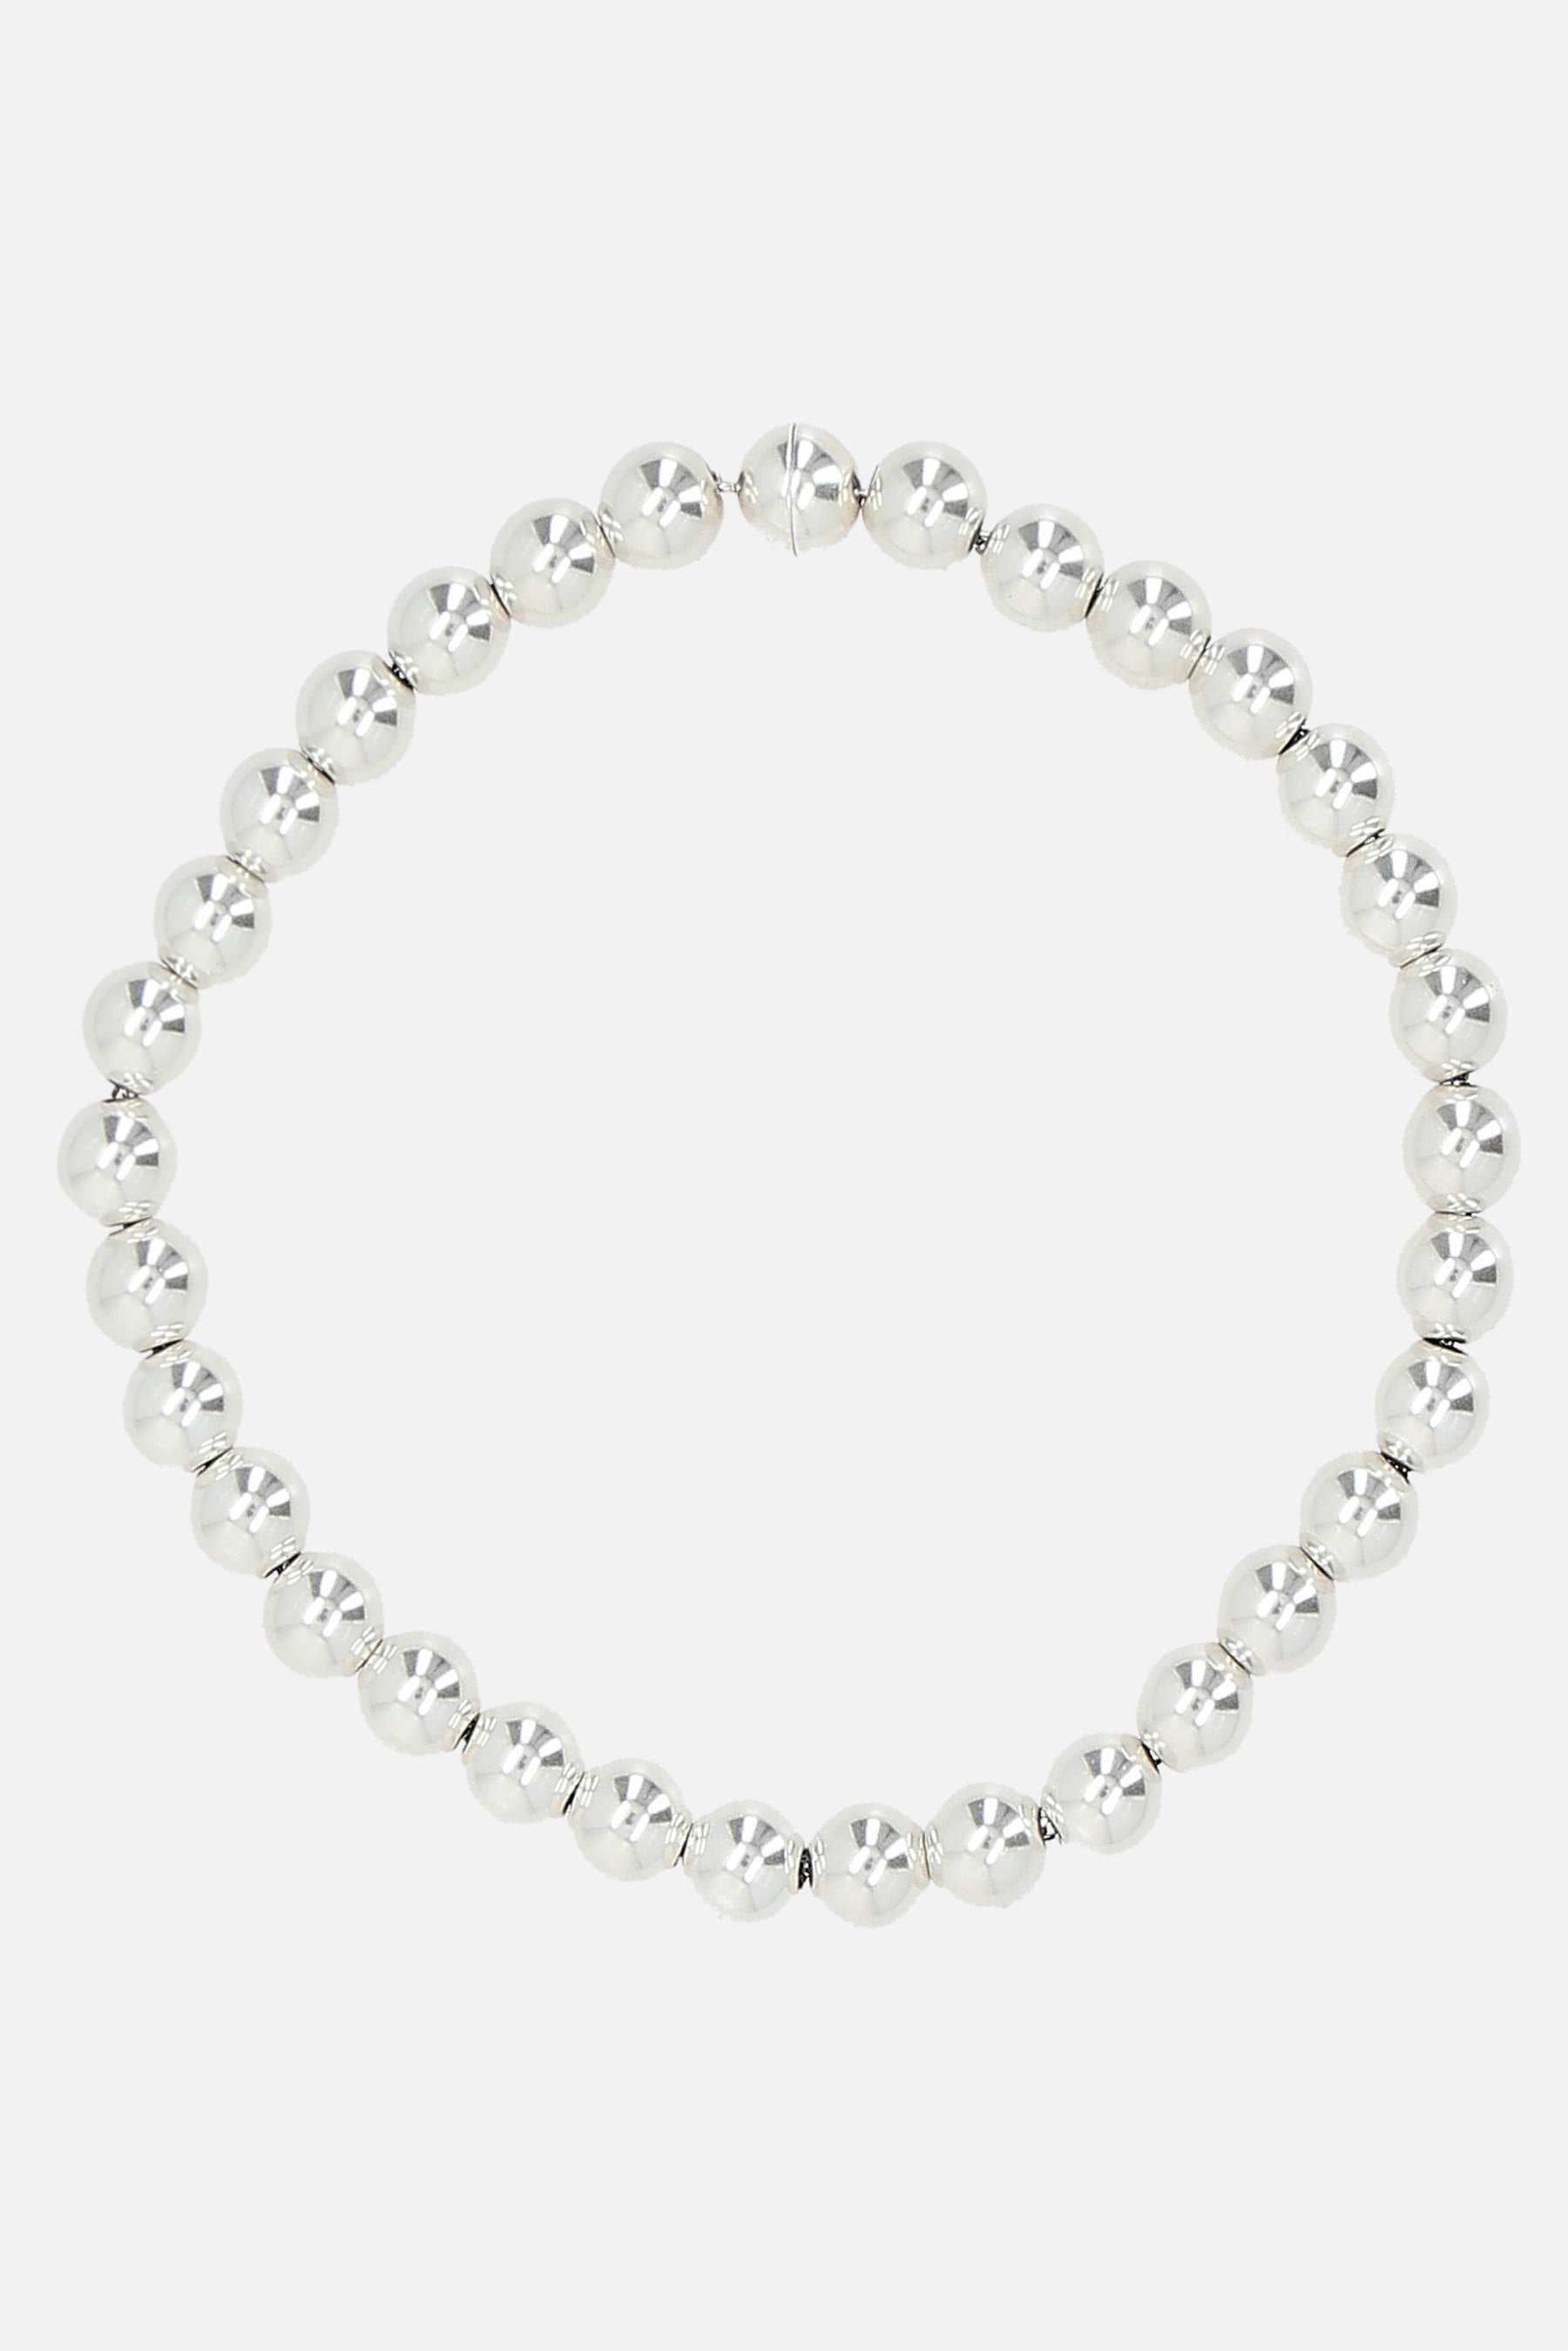 925 sterling silver necklace with spheres